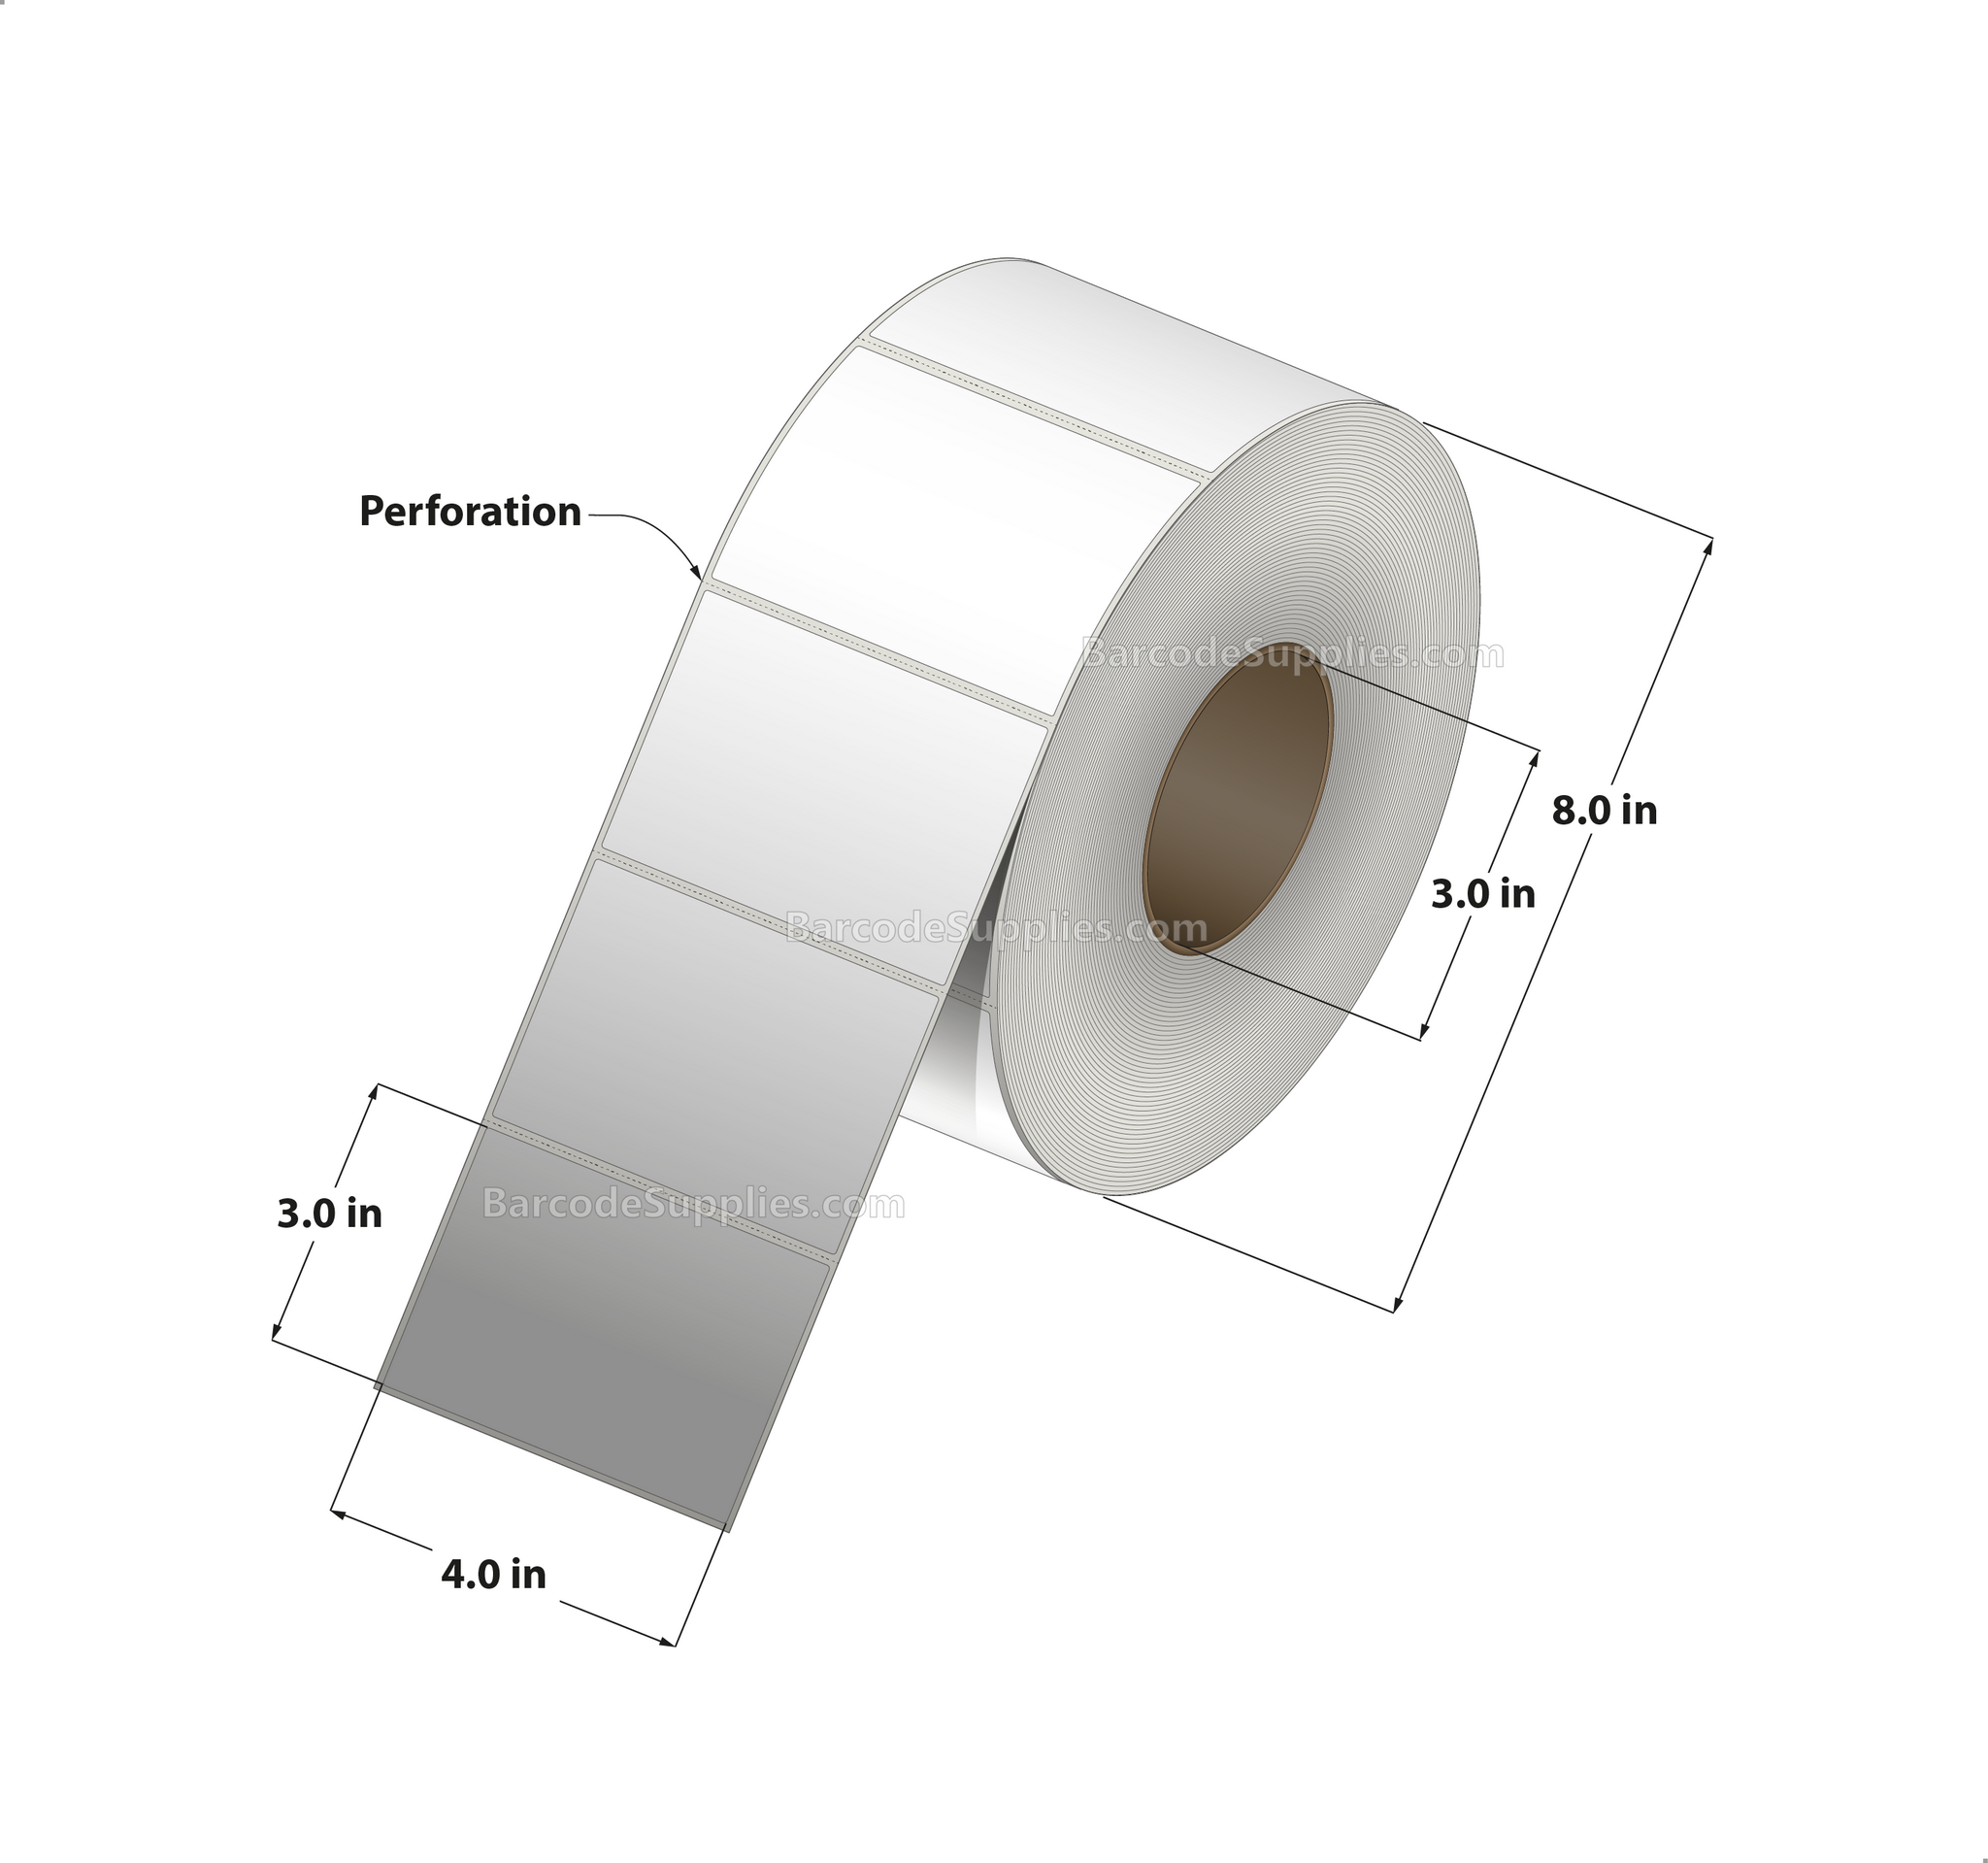 4 x 3 Direct Thermal White Labels With Permanent Acrylic Adhesive - Perforated - 1900 Labels Per Roll - Carton Of 4 Rolls - 7600 Labels Total - MPN: DT43-1P